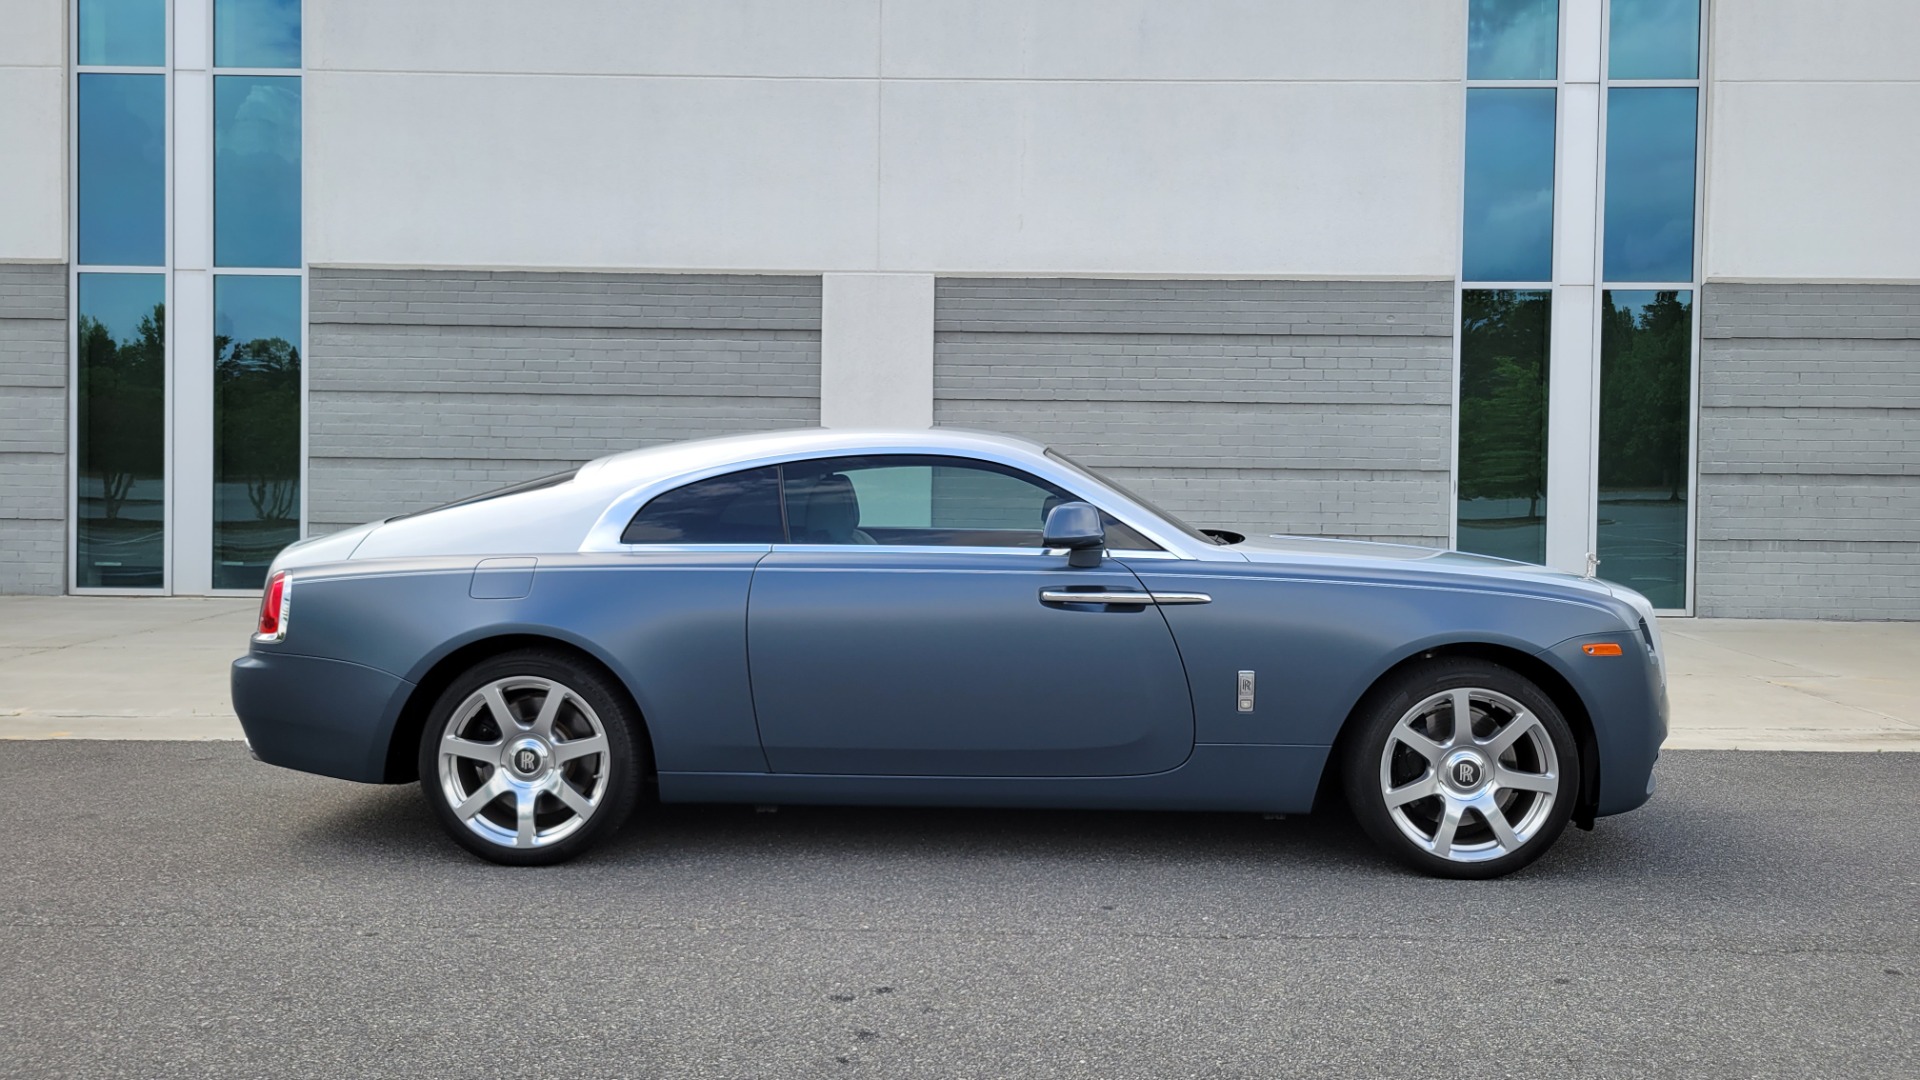 Used 2016 Rolls-Royce WRAITH COUPE / 6.6L V12 624HP / 8-SPD AUTO / NAV / STARLIGHT / REARVIEW for sale Sold at Formula Imports in Charlotte NC 28227 8